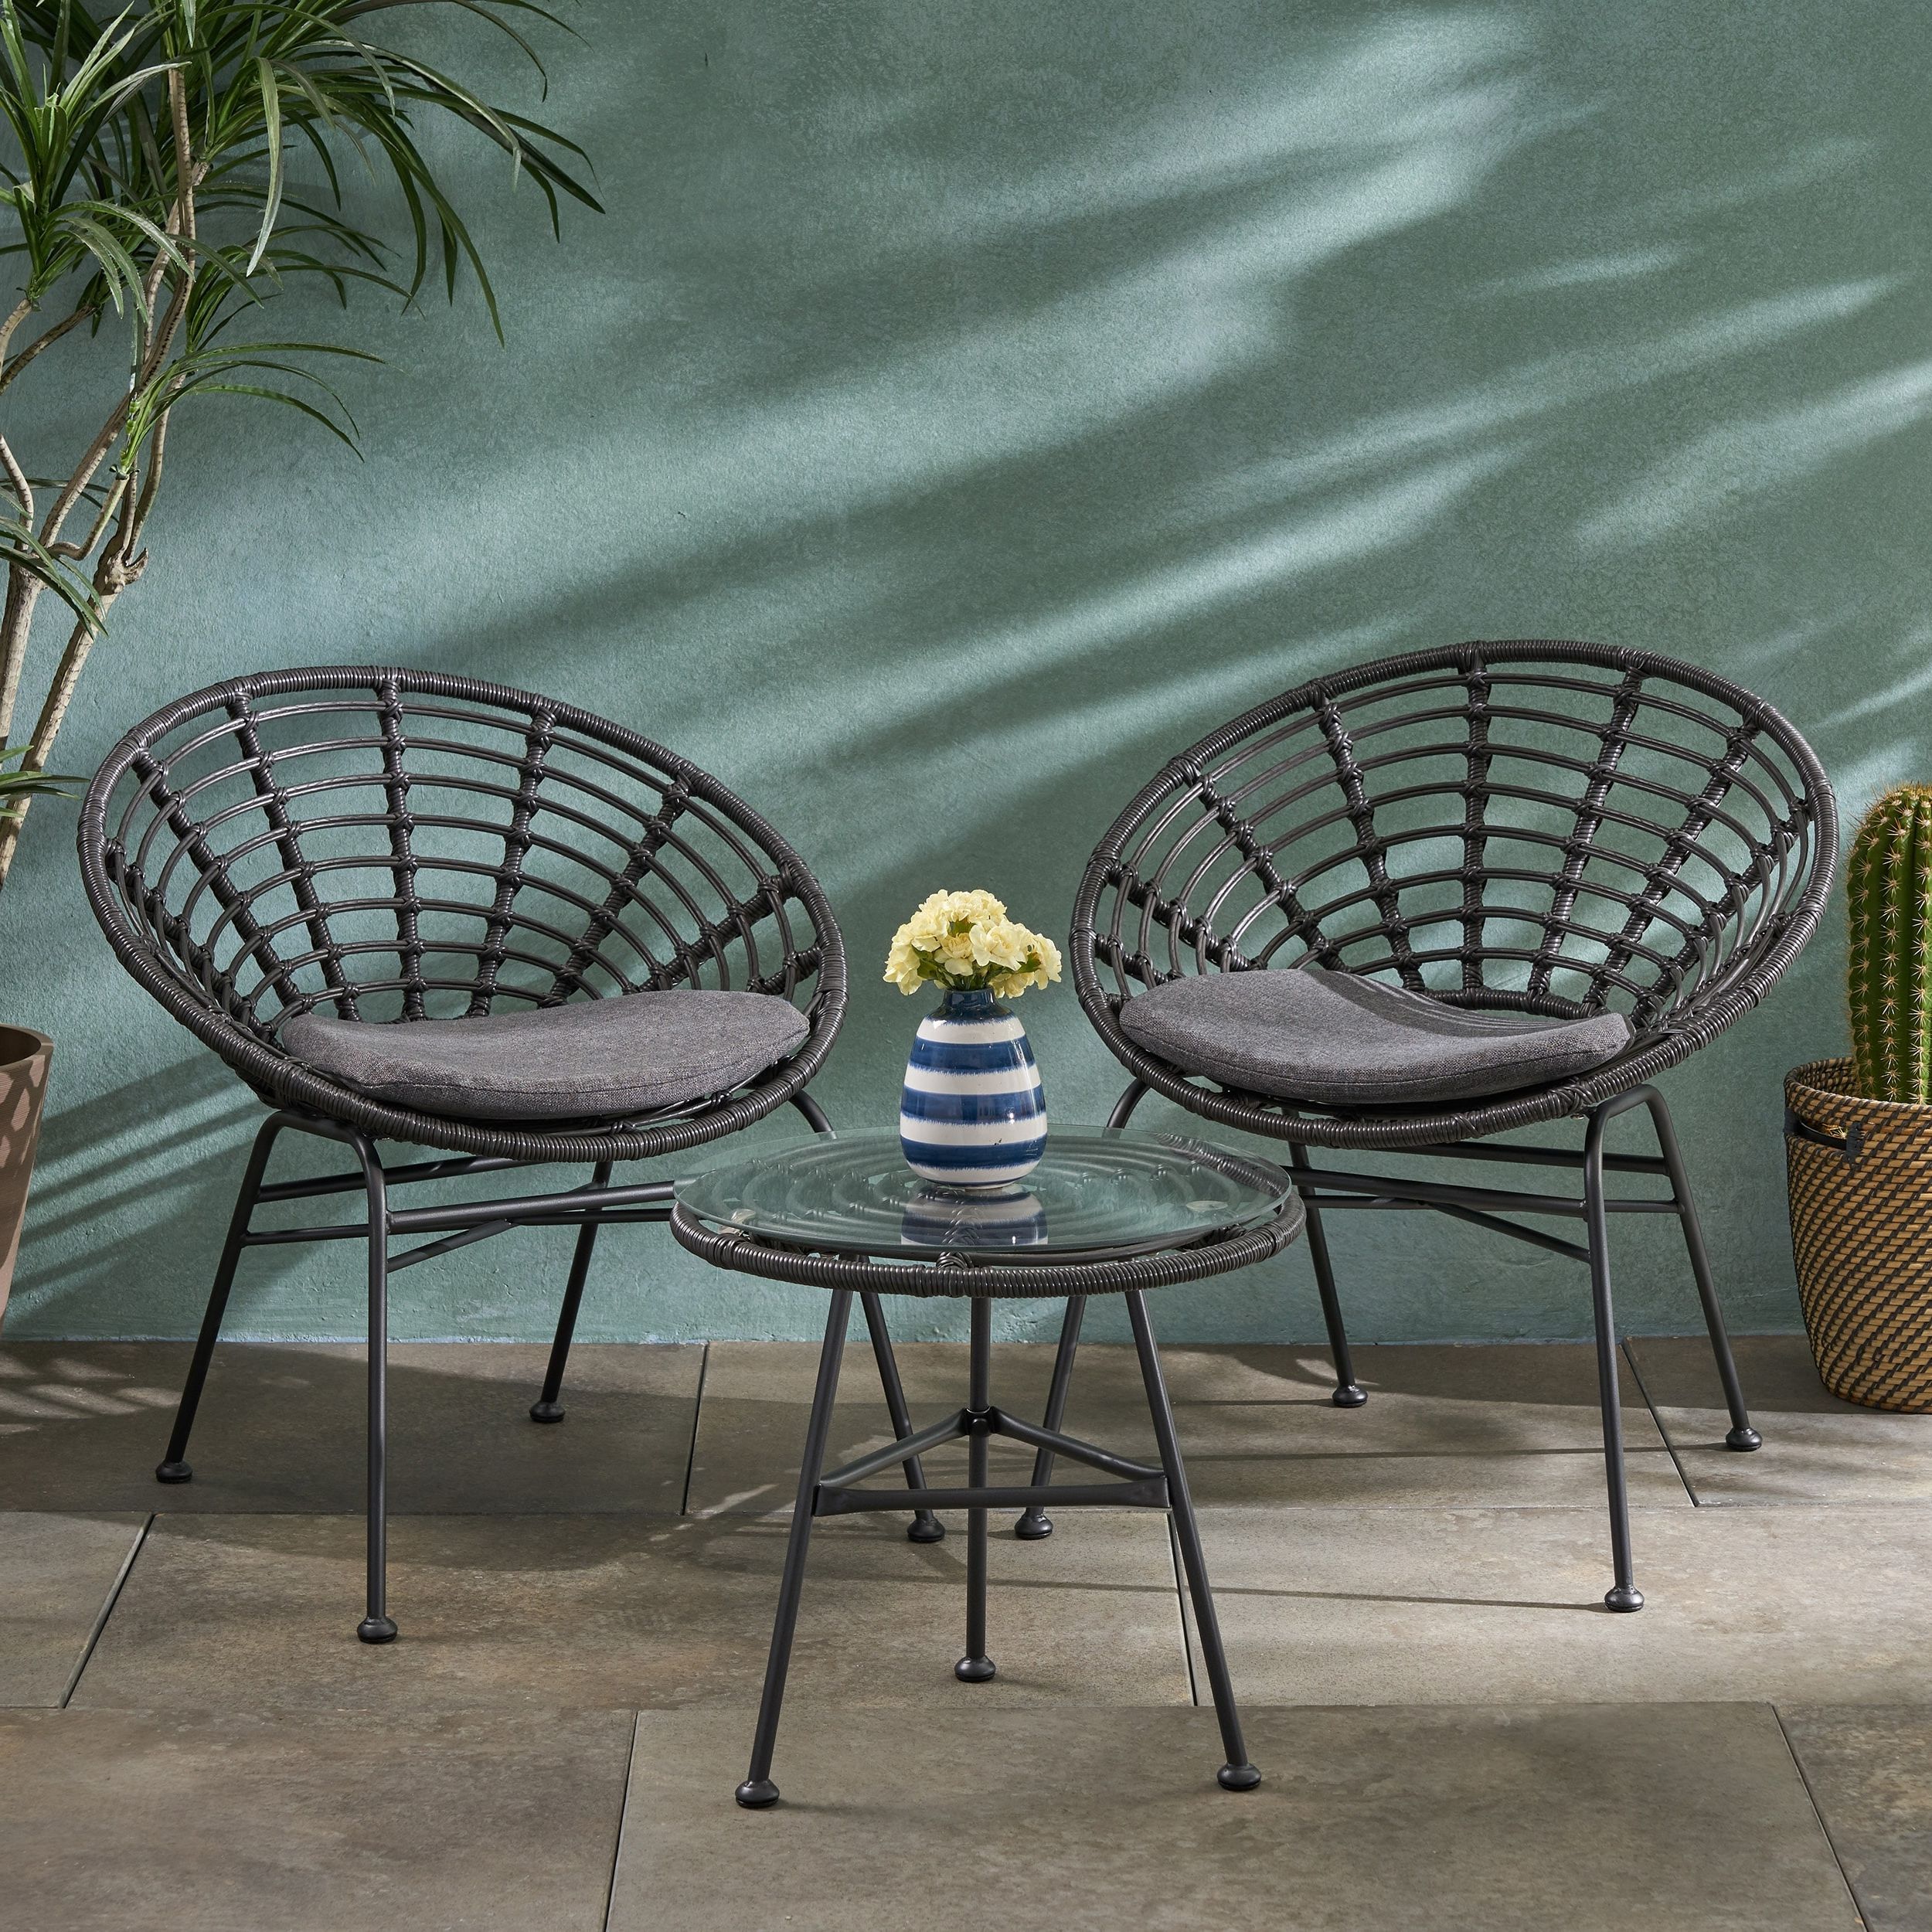 Pigment Outdoor Modern Boho 2 Seater Wicker Chat Set With Side Table Christopher Knight Home – On Sale – Overstock – 28422729 Inside Fashionable 3 Piece Outdoor Boho Wicker Chat Set (Photo 5 of 15)